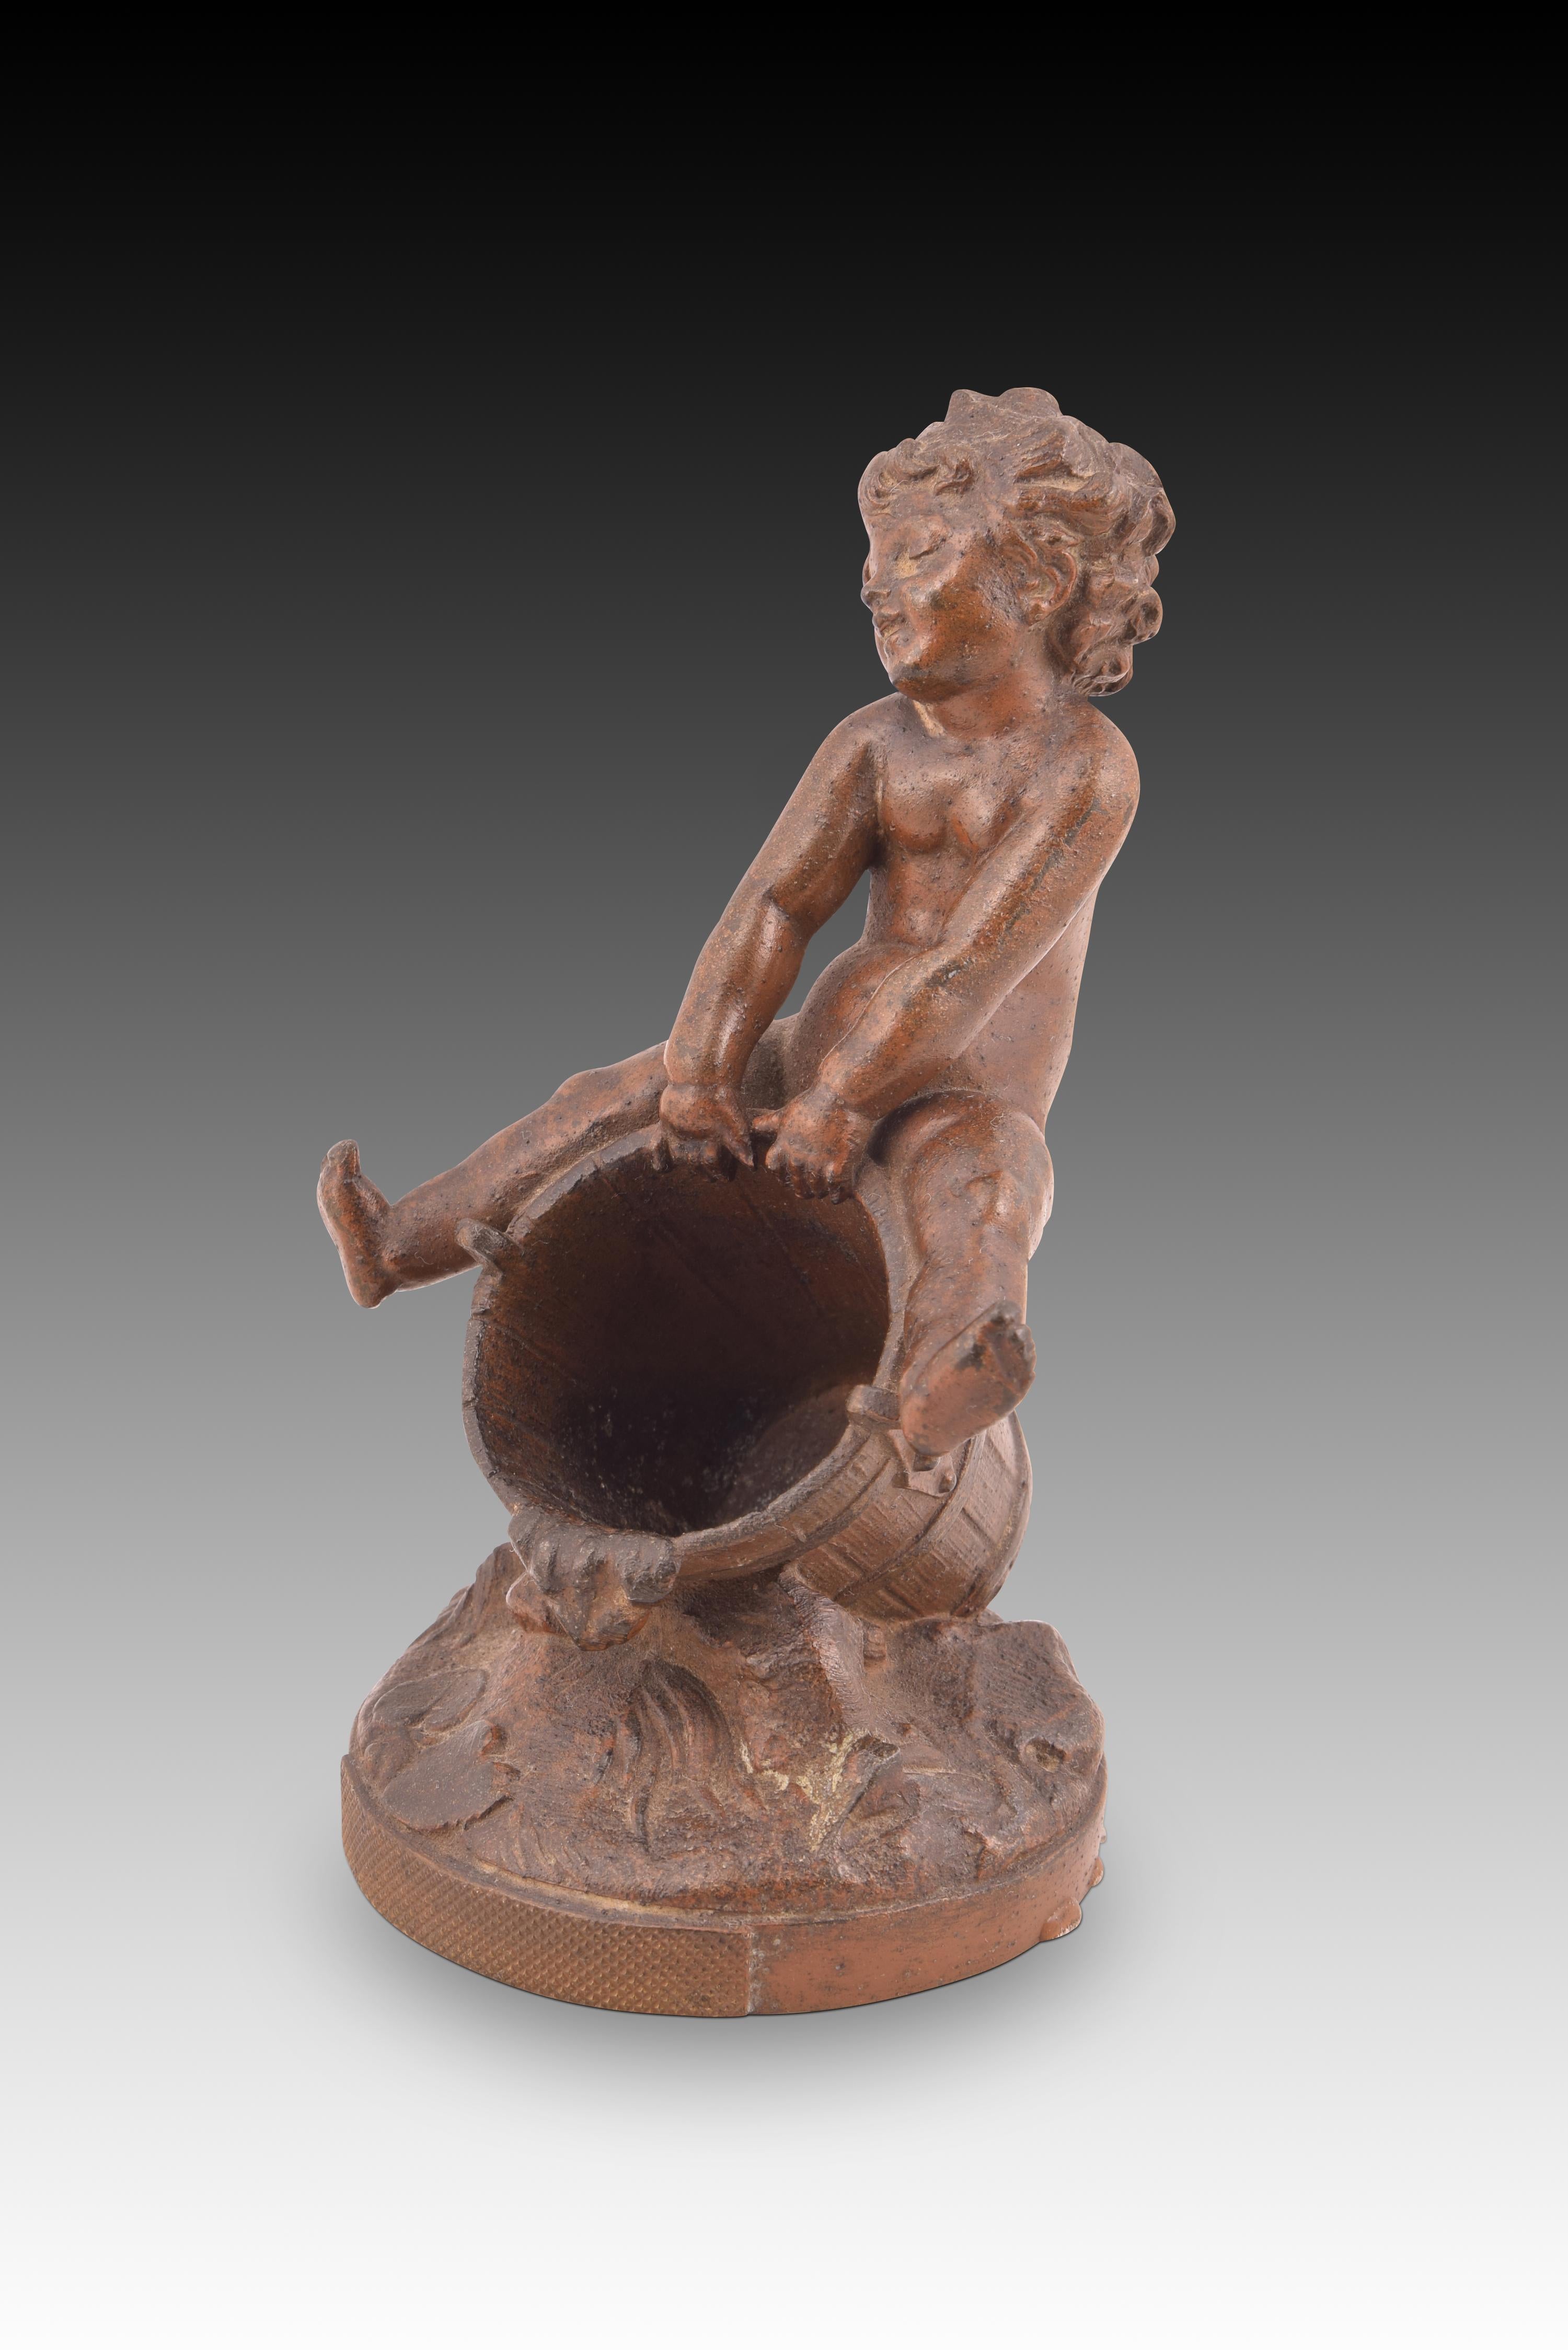 Other Child riding a bucket, figurine. Calamine. Circa 1900. For Sale